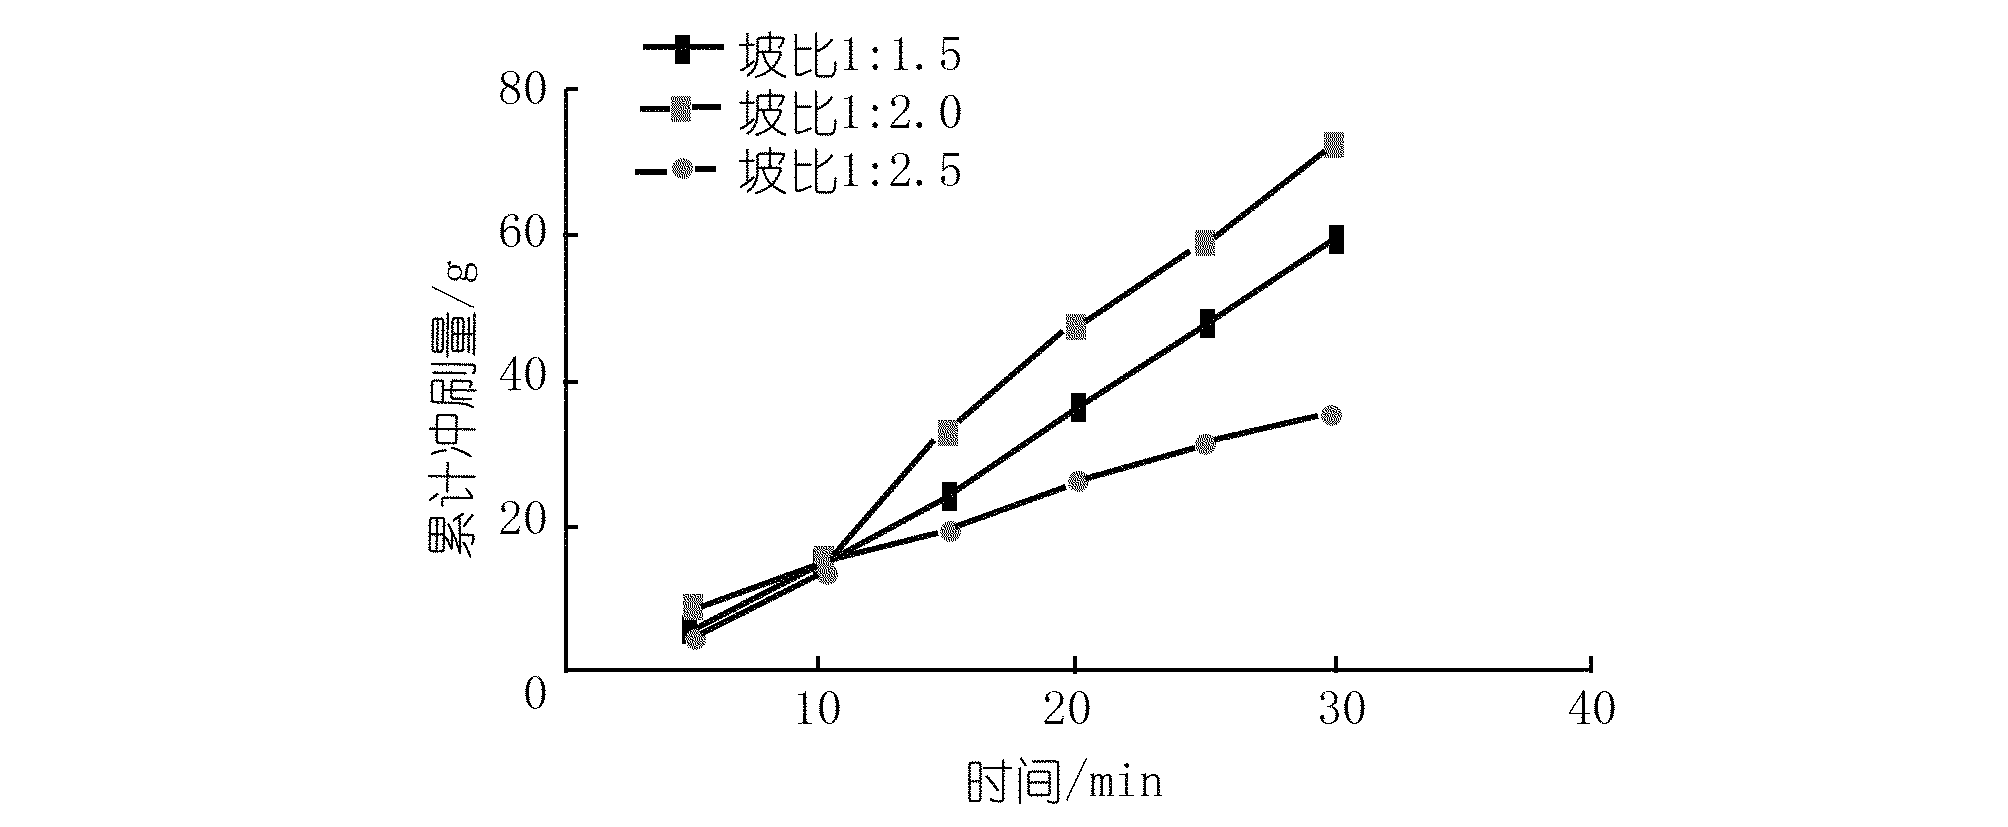 the amount of erosion of the second slope of the chamber under different slope ratios